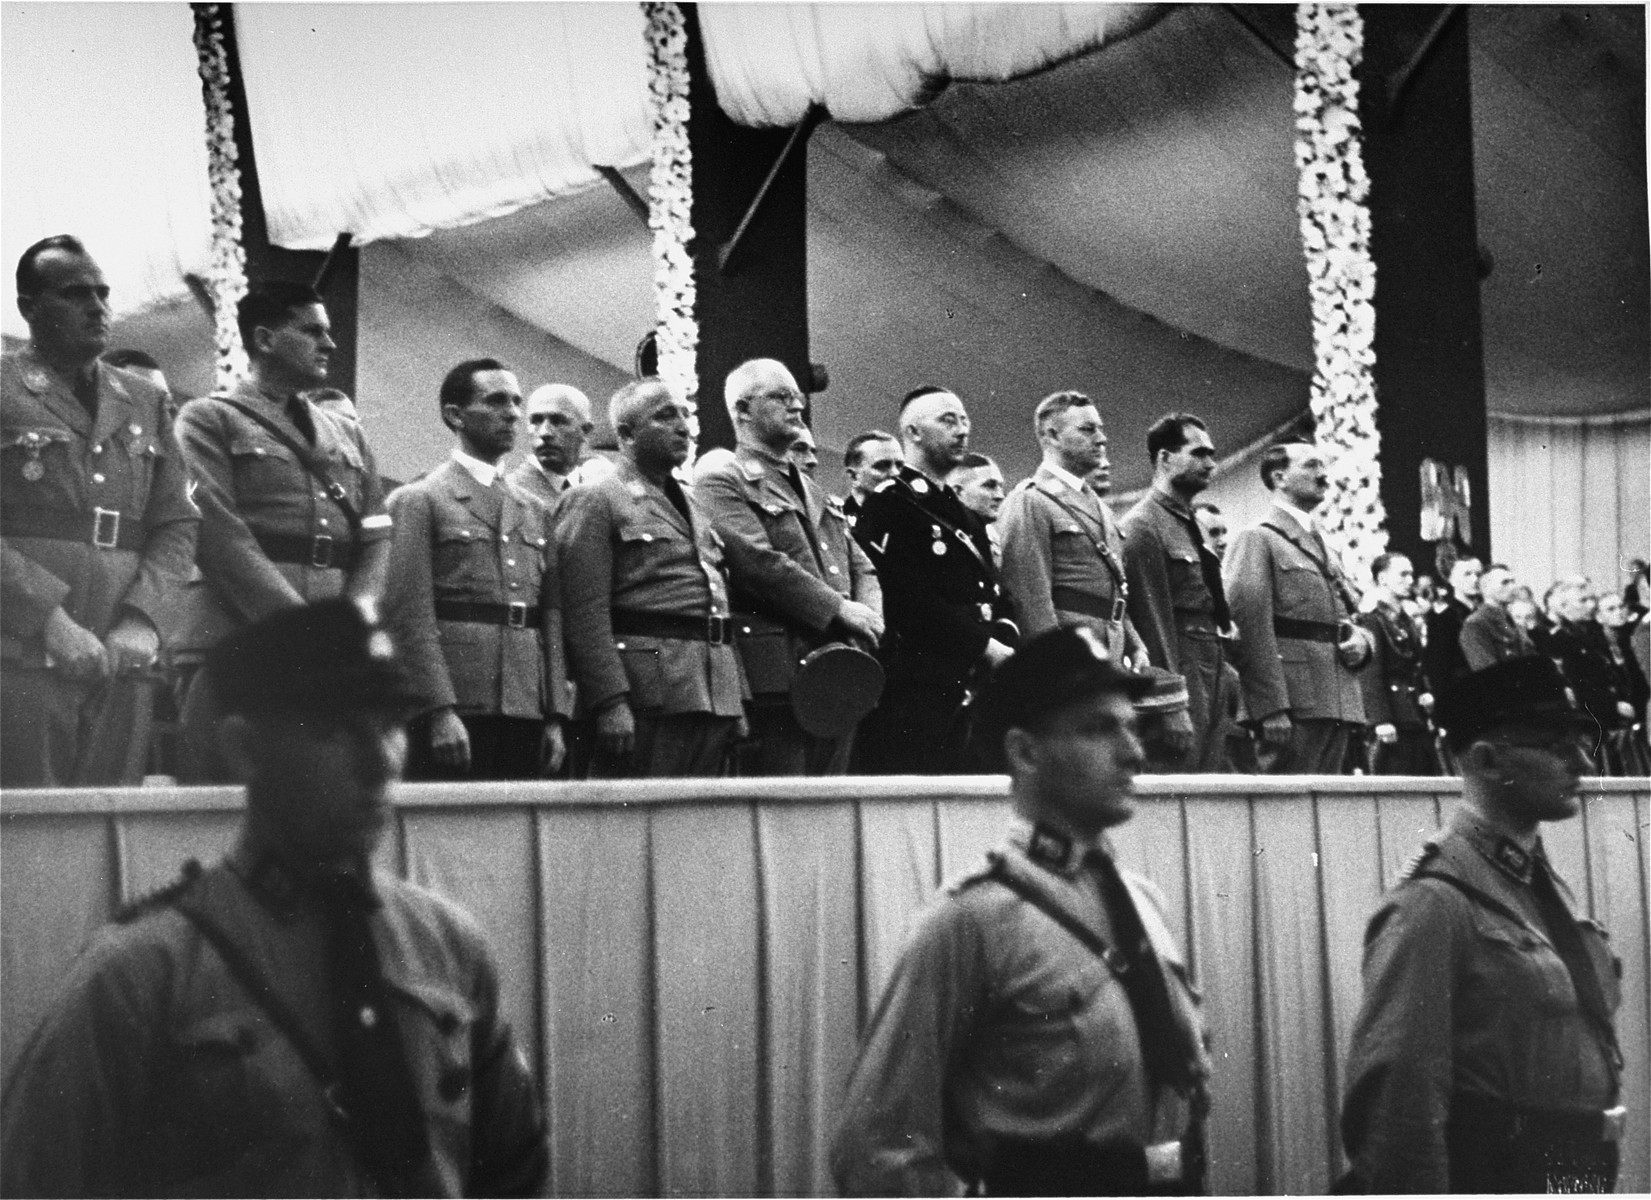 Adolf Hitler stands on a podium in the Luitpold Hall in Nuremberg with Rudolf Hess, Heinrich Himmler, and Joseph Goebbels during Reichsparteitag (Reich Party Day) ceremonies.  

This image is from an SS album.